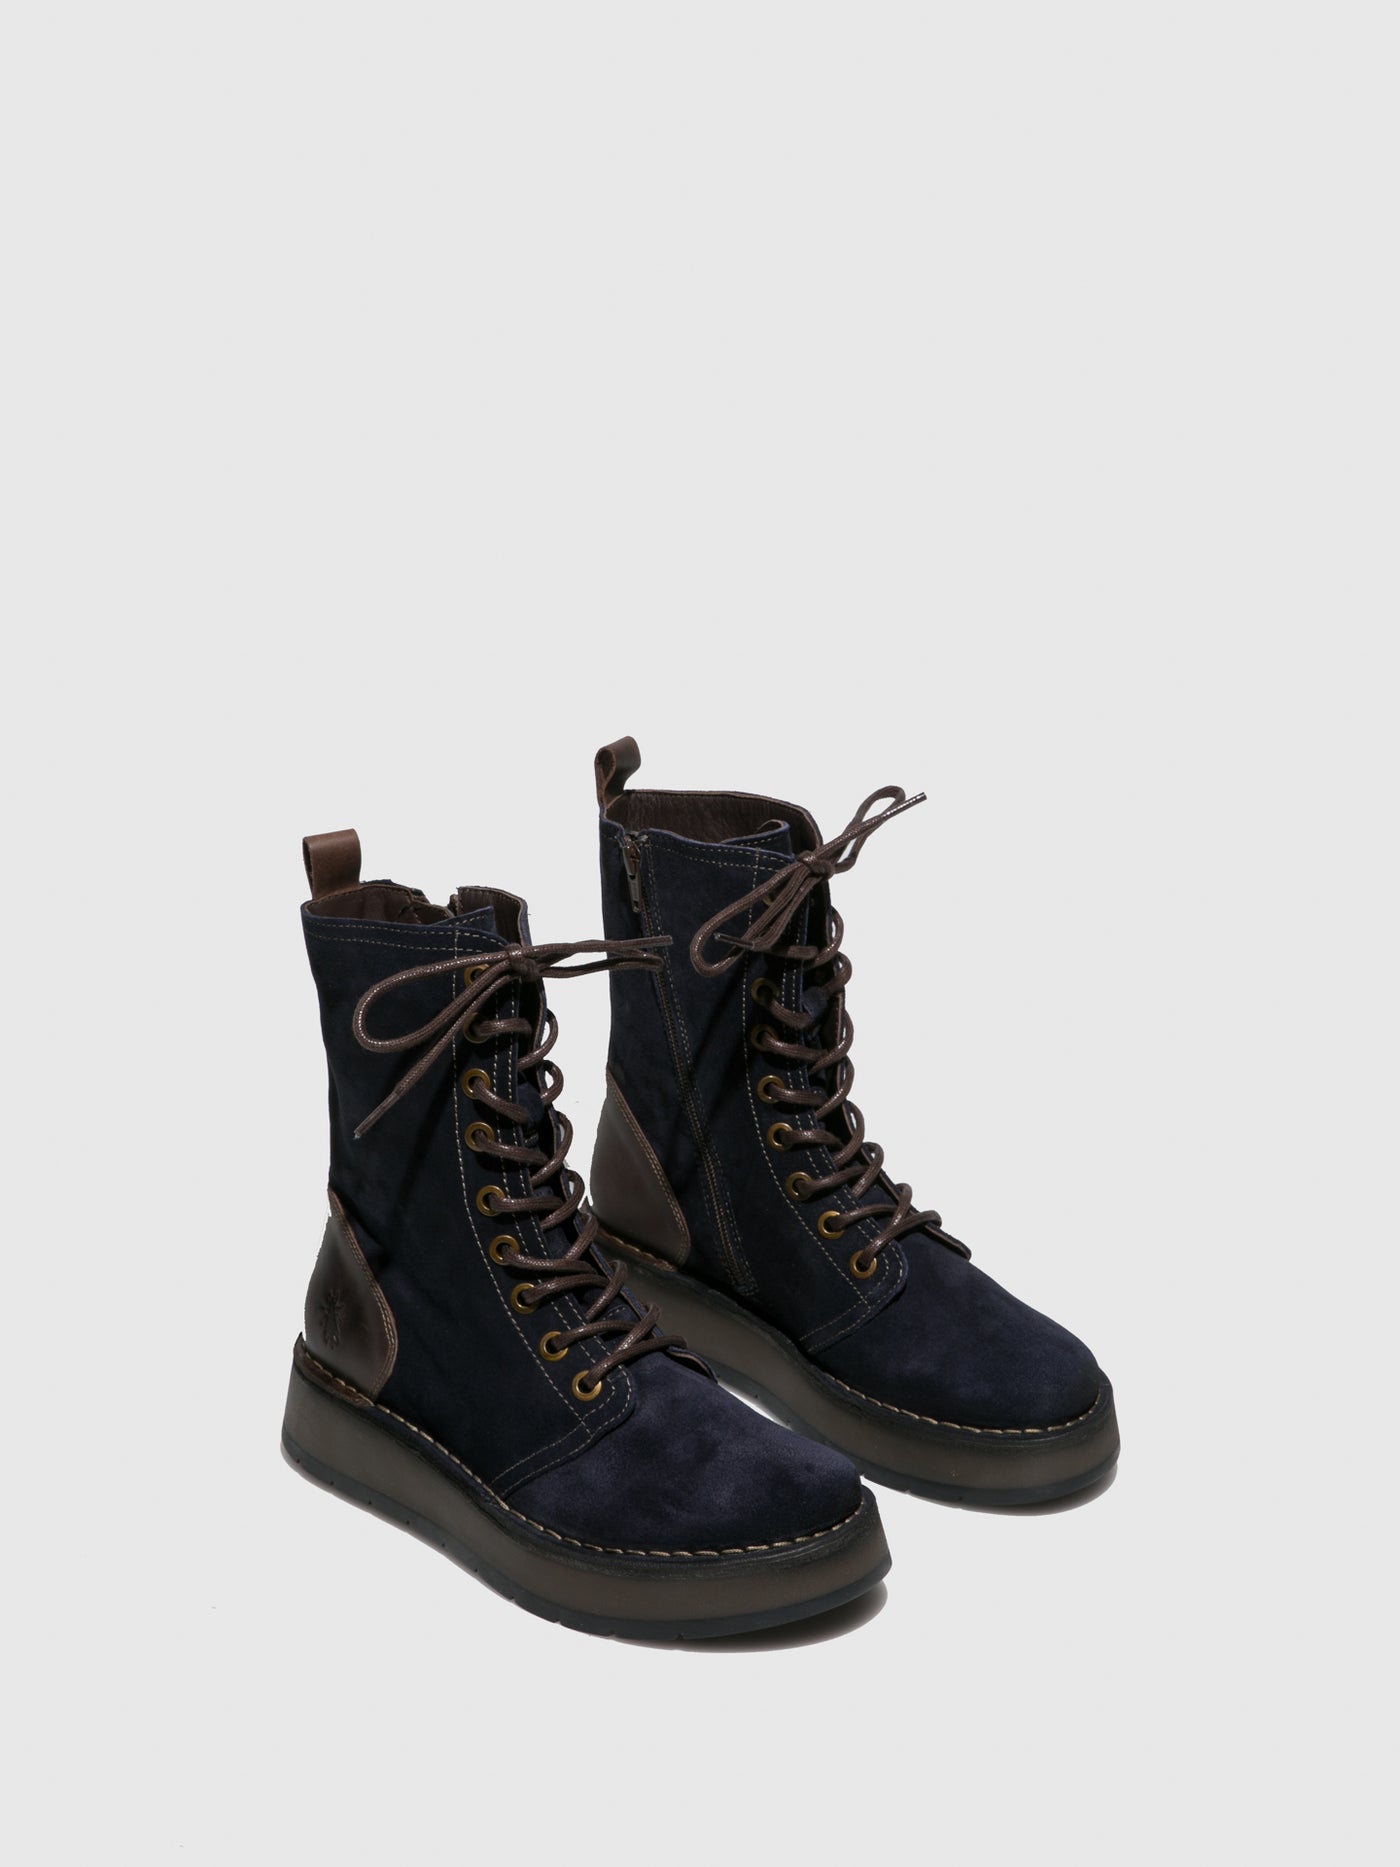 Lace-up Ankle Boots RAMI043FLY OILSUEDE/RUG NAVY/DK.BROWN